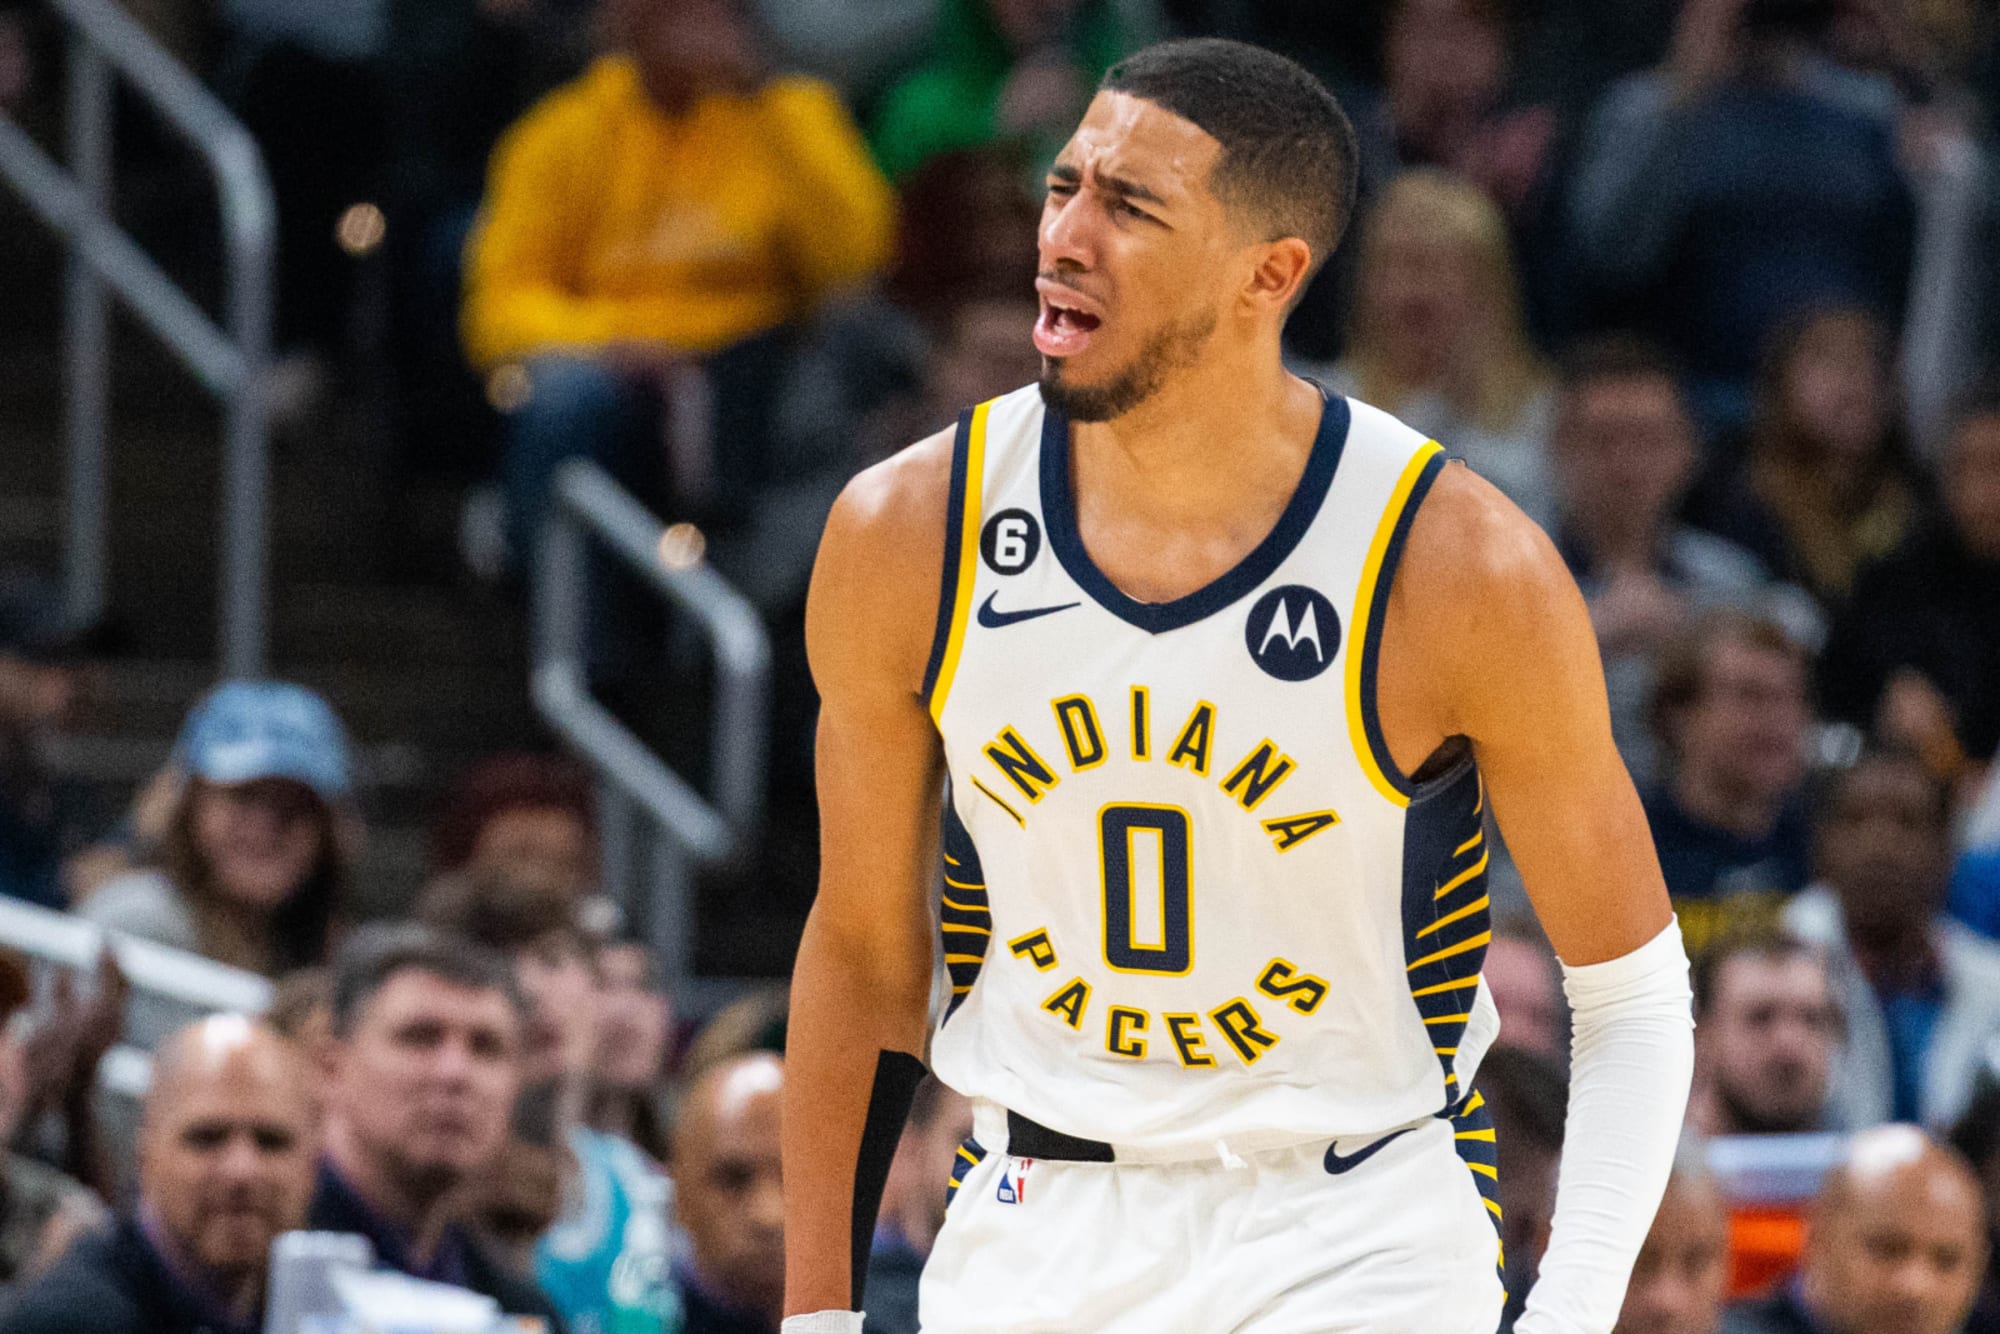 Indiana Pacers reveal cringeworthy new city edition uniforms